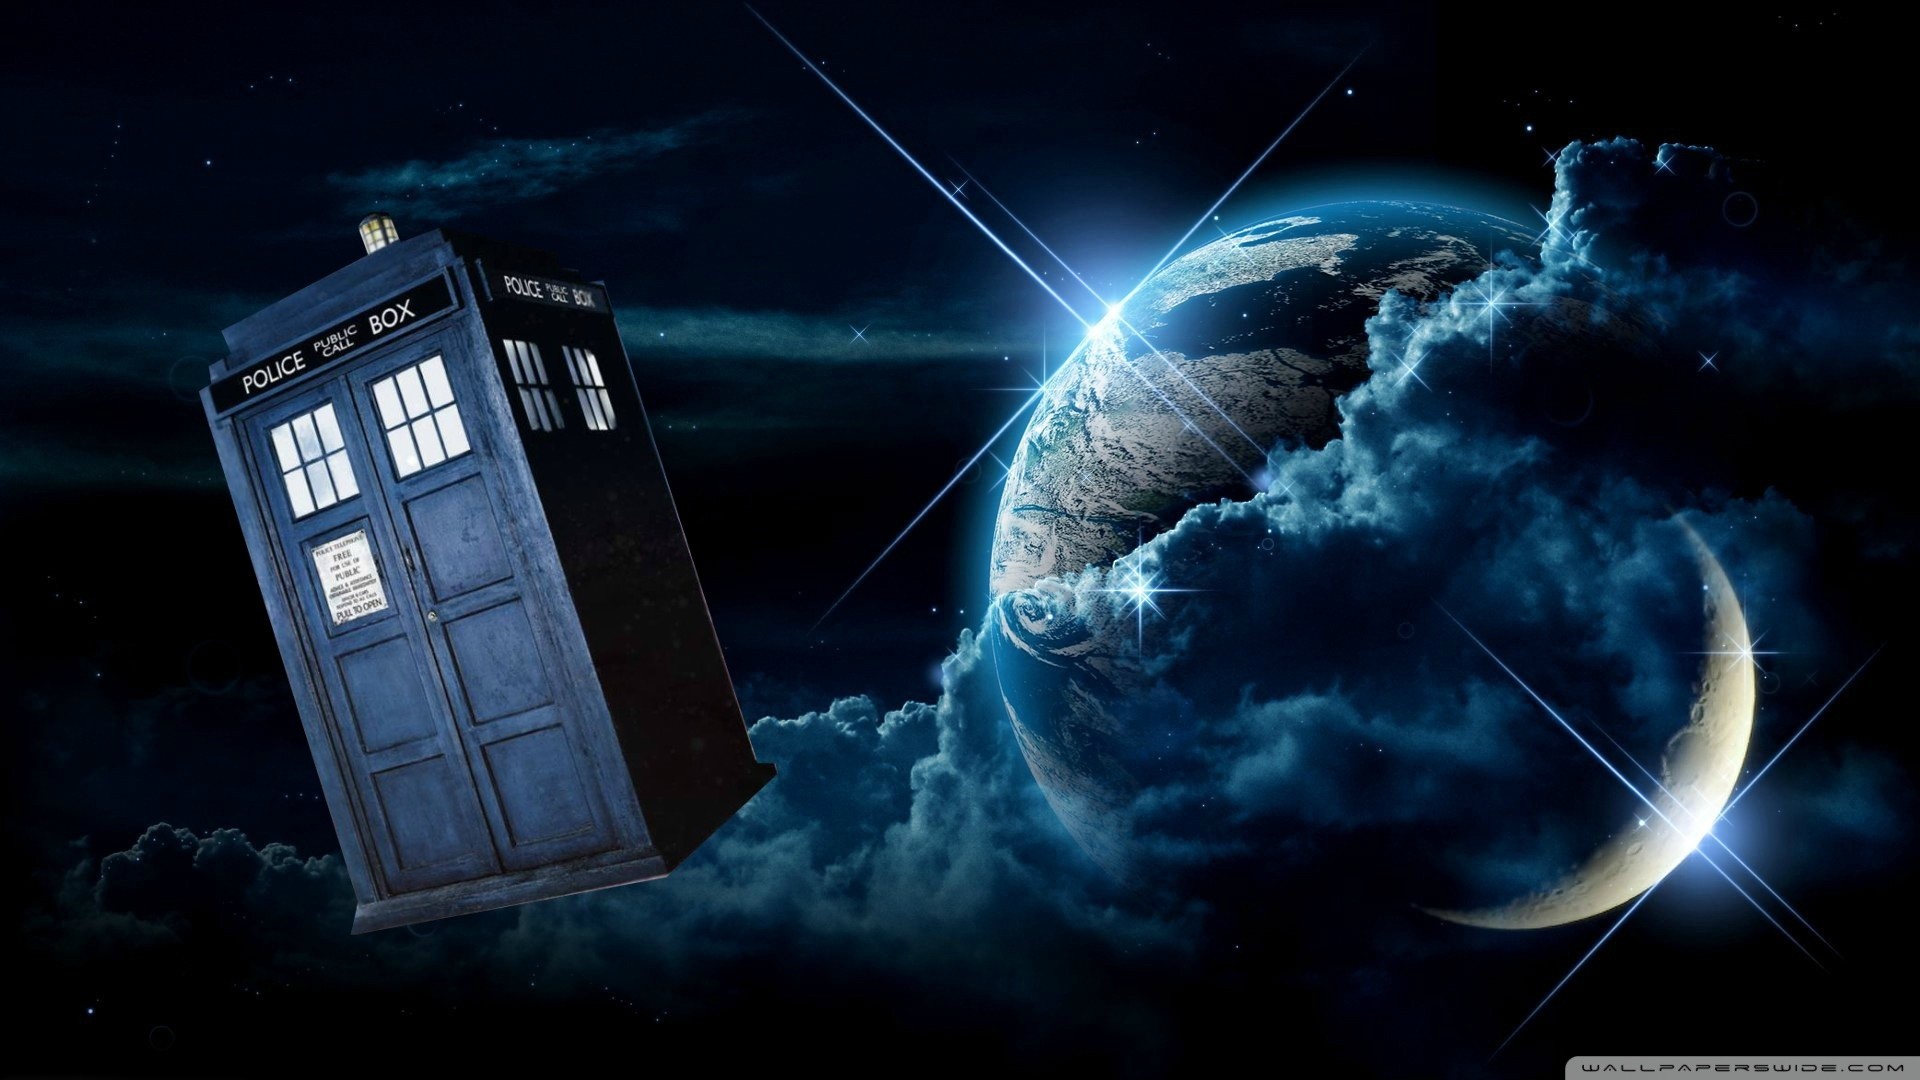 Doctor Who Wallpaper Tardis The Best Image In